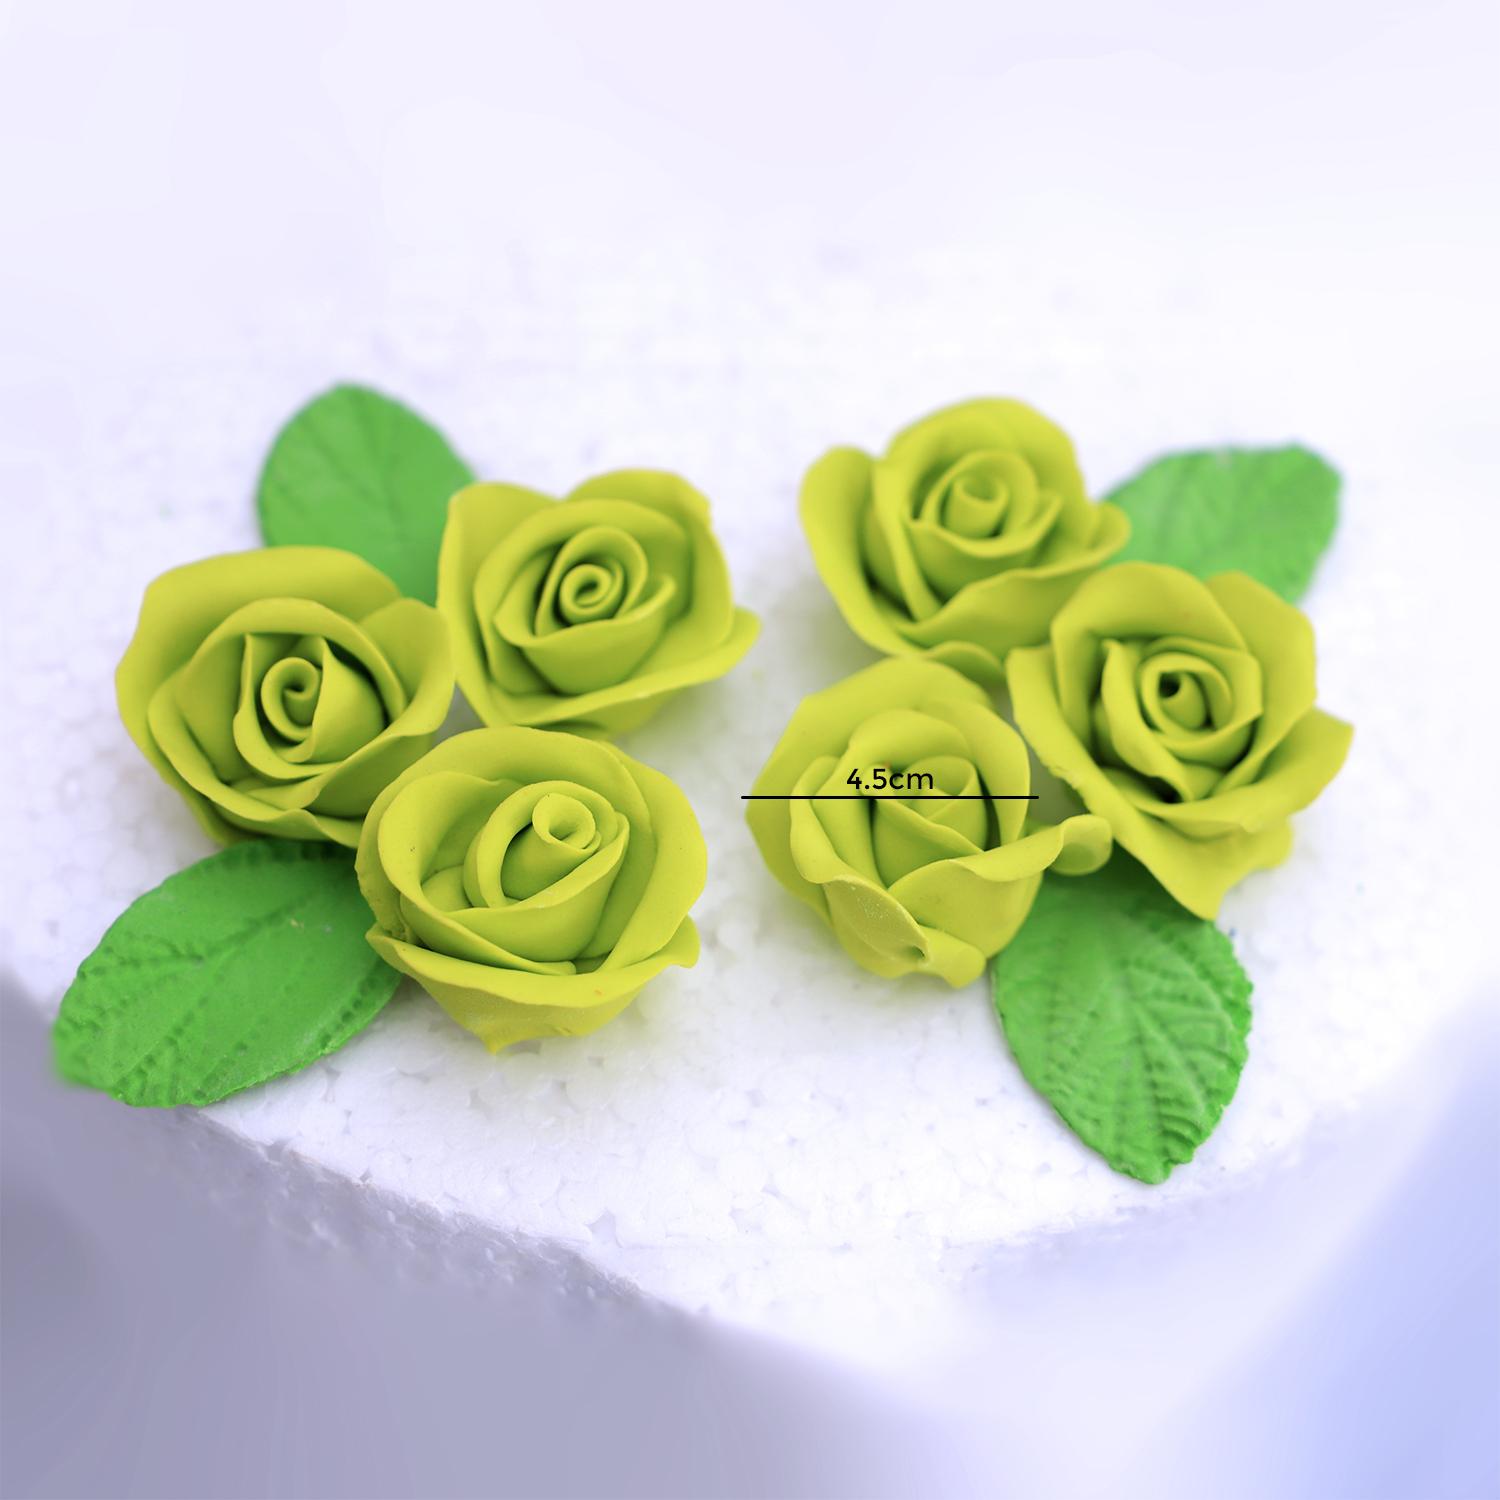 SUPER CAKES SMALL ROSE FLOWERS LIME GREEN